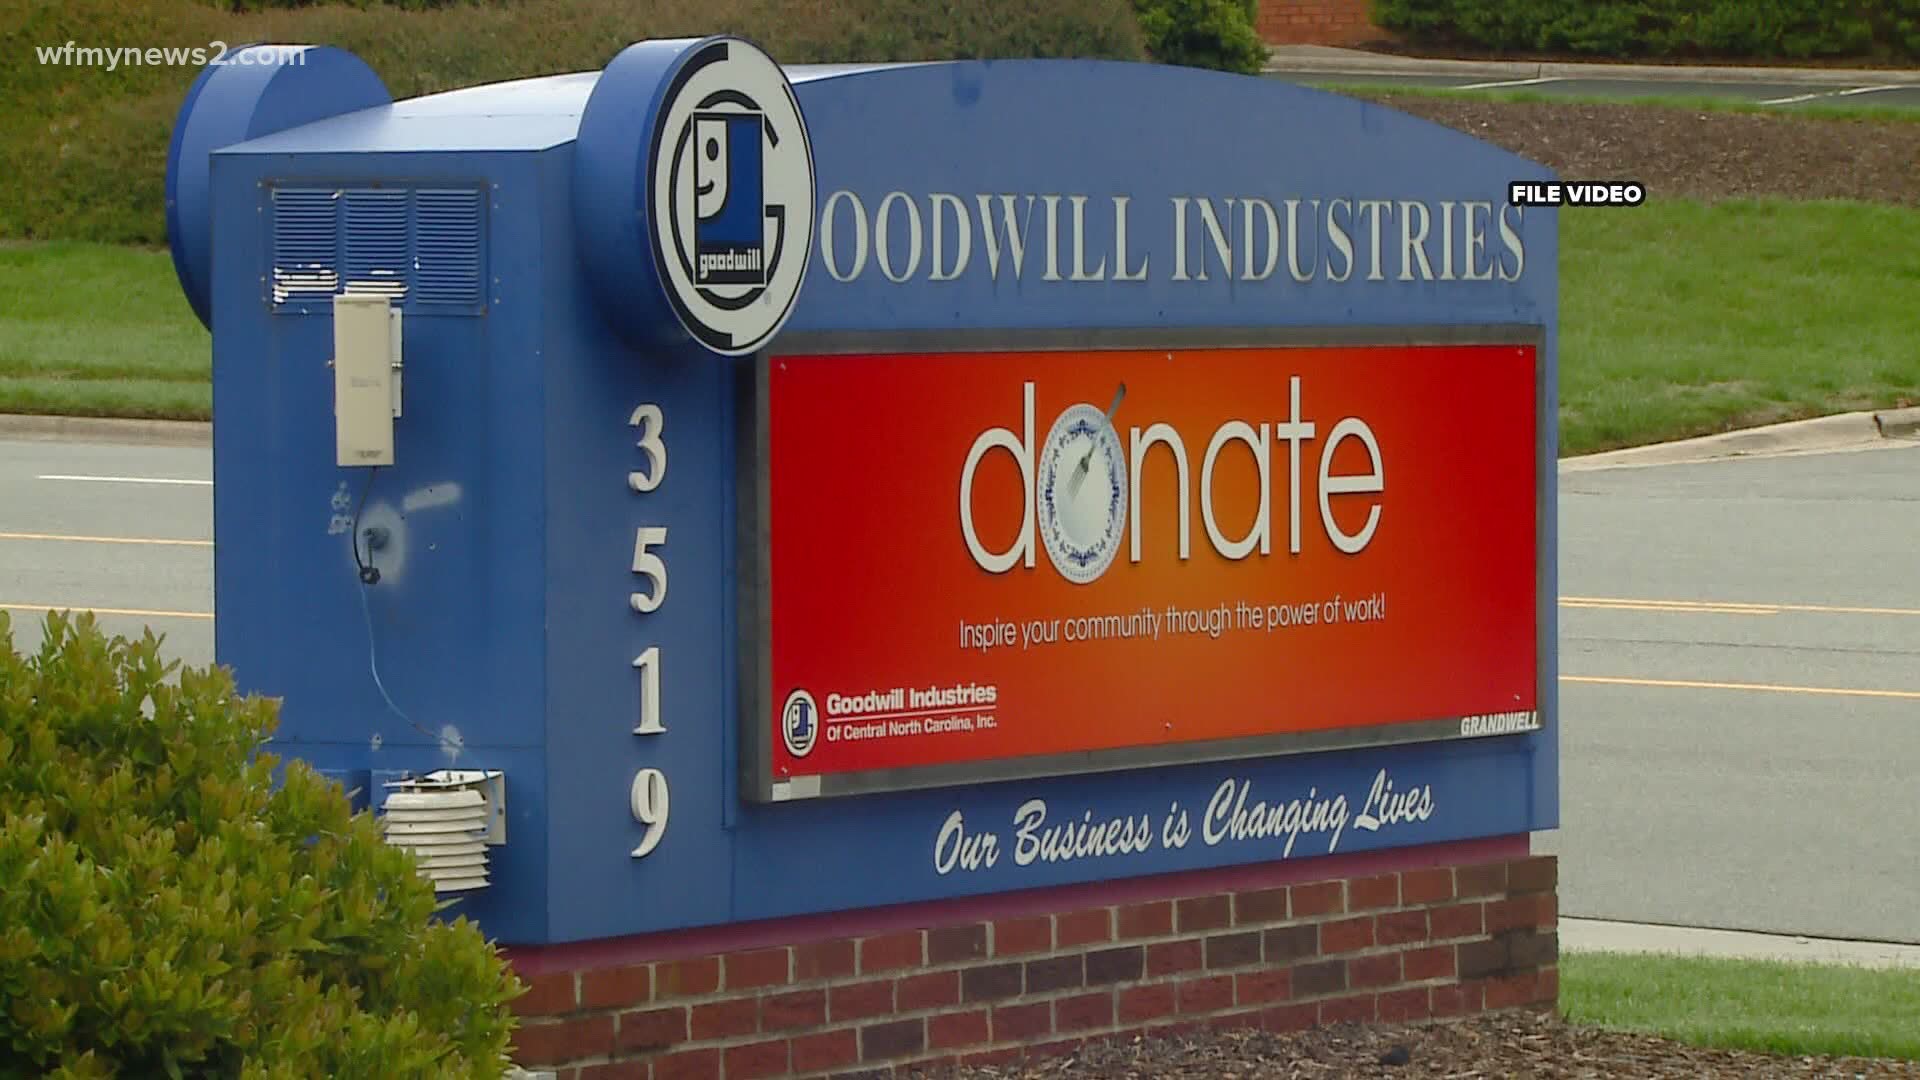 Goodwill offers bargain back-to-school items, such as clothes, books and electronics.